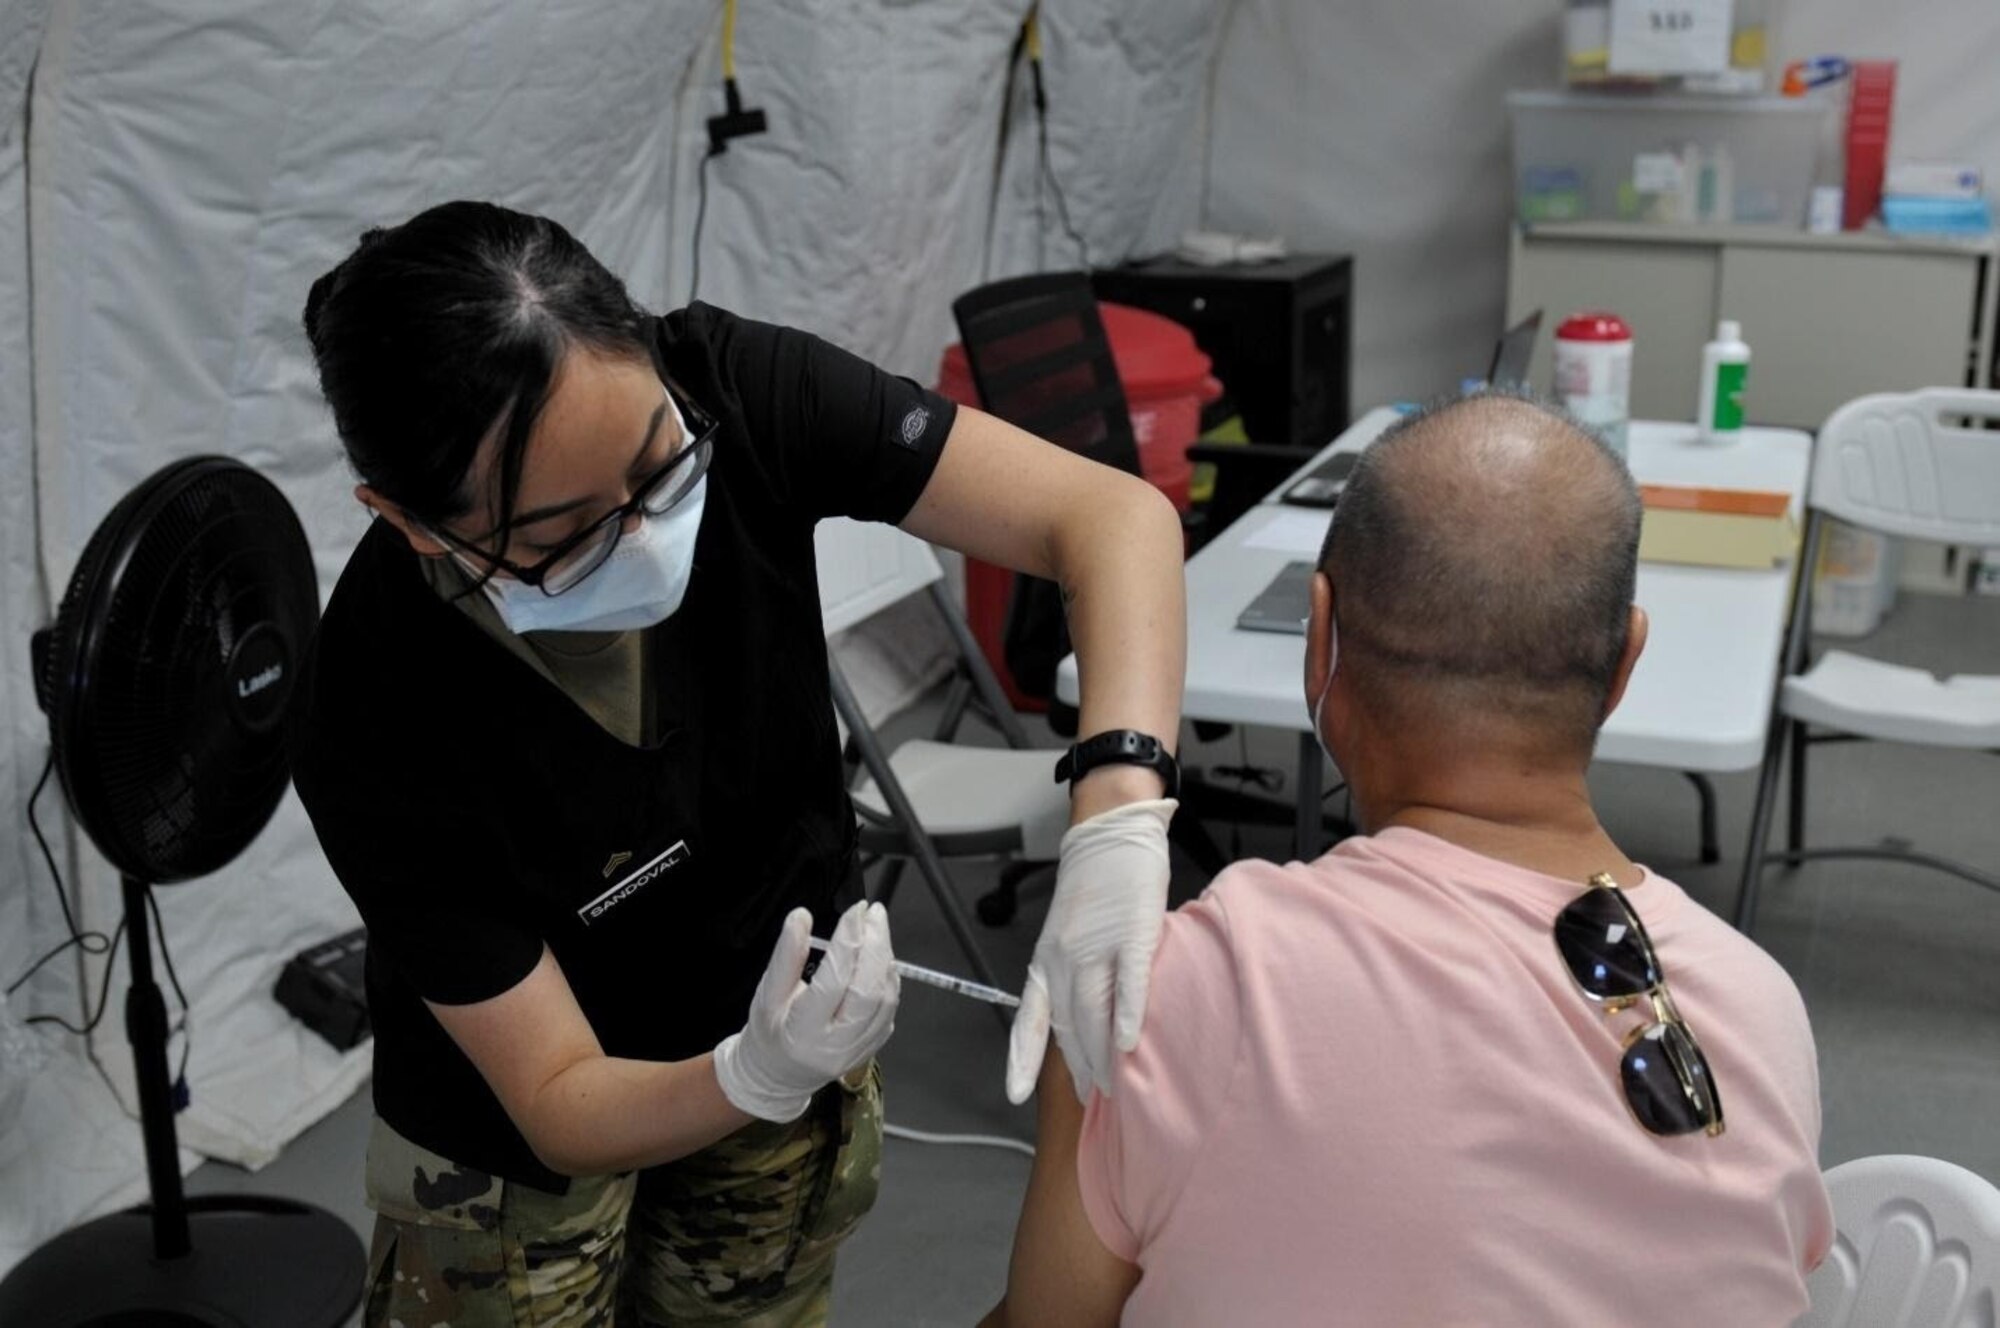 Sgt. Diana Sandoval, assigned to 25th Infantry Division, administers a COVID-19 Vaccine in support of the Commonwealth Healthcare Corporation (CHCC) COVID-19 Vaccination team at the Medical Care and Treatment Site (MCATS).